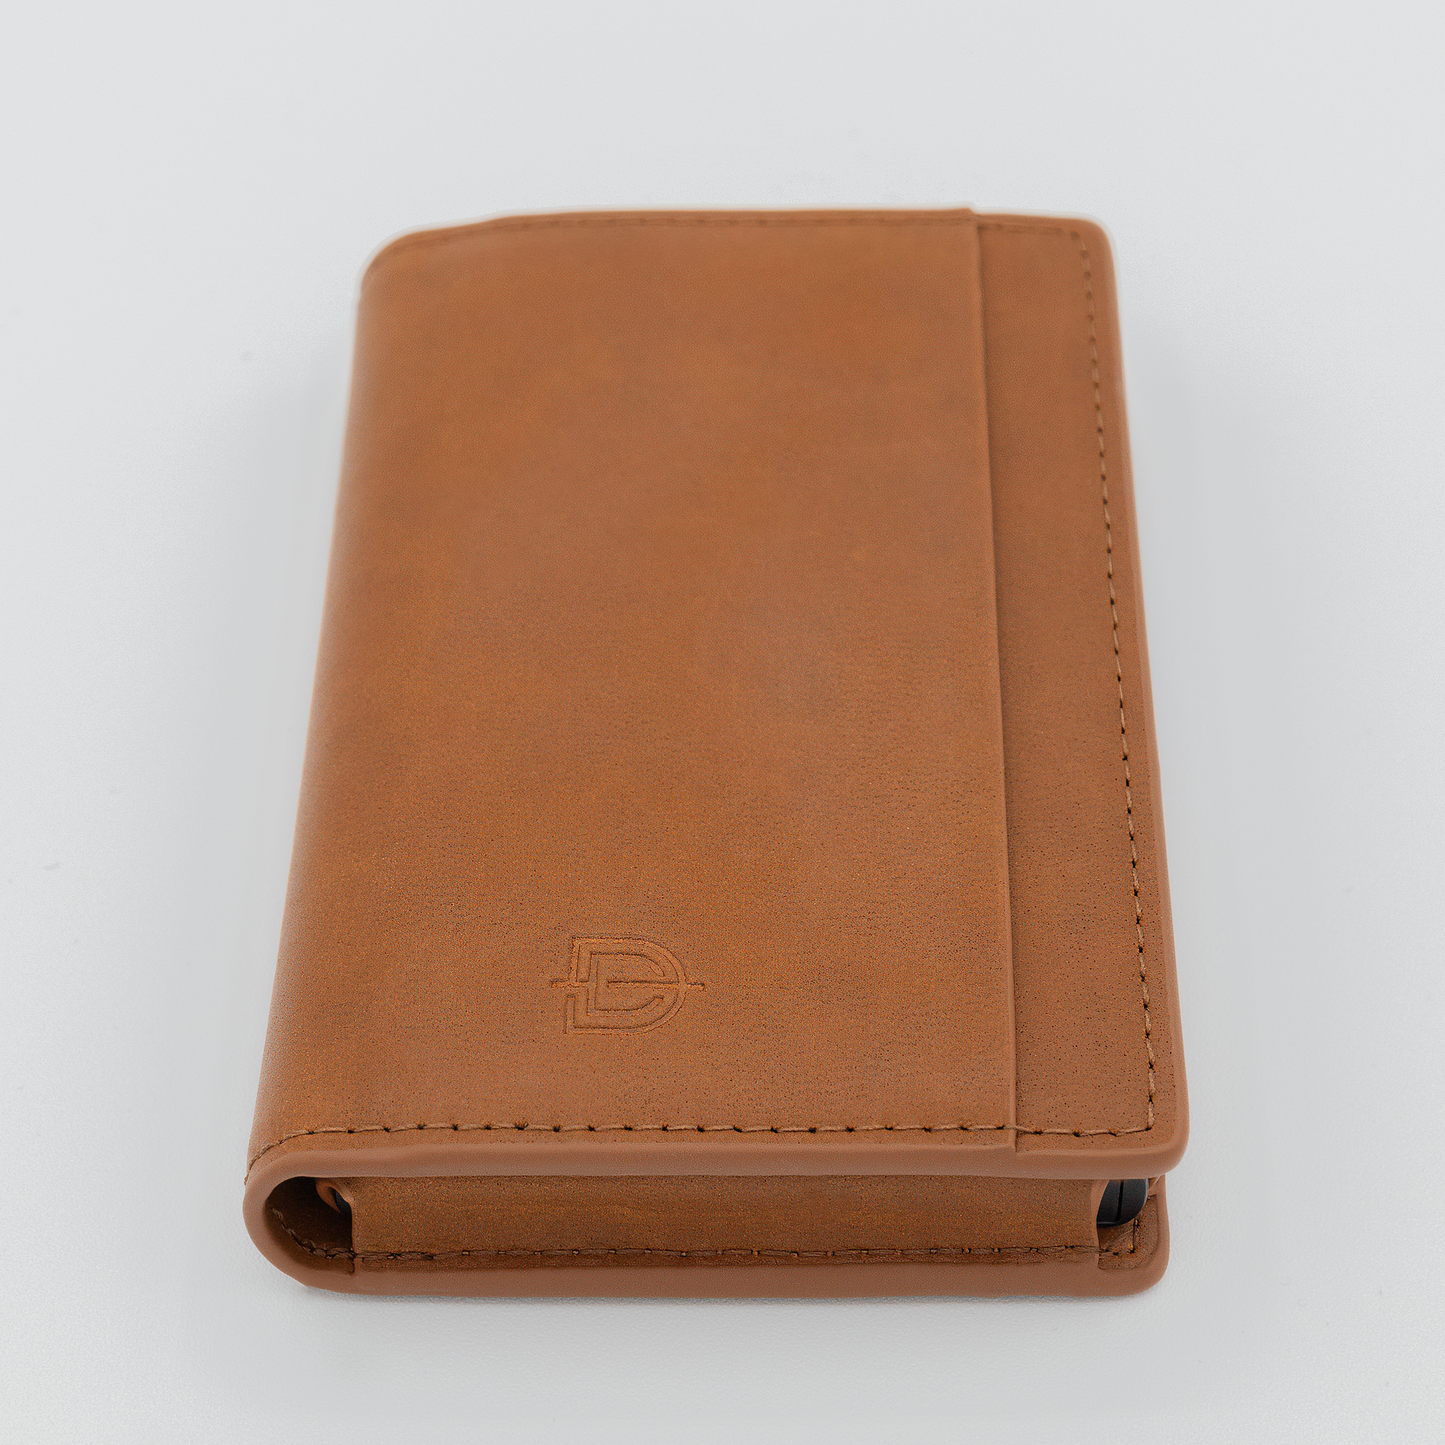 Personalize - The Alexander Rust by Dashclip